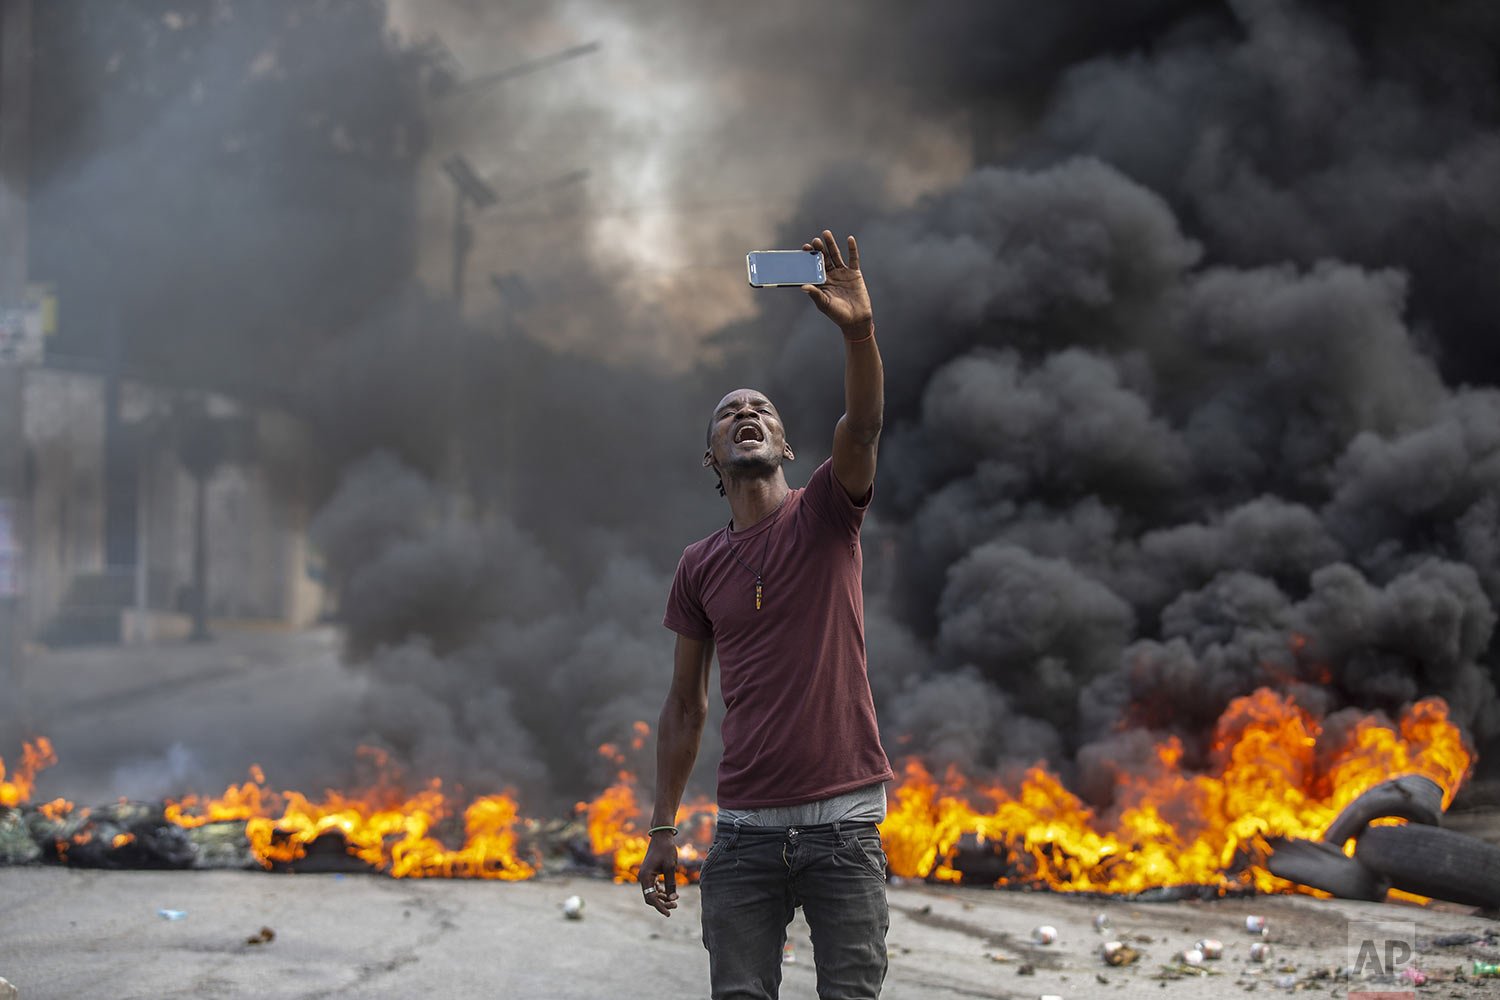  A protester takes a selfie at a burning barricade set by protesters angry over lack of security in Port-au-Prince, Haiti, Oct. 18, 2021. (AP Photo/Odelyn Joseph) 